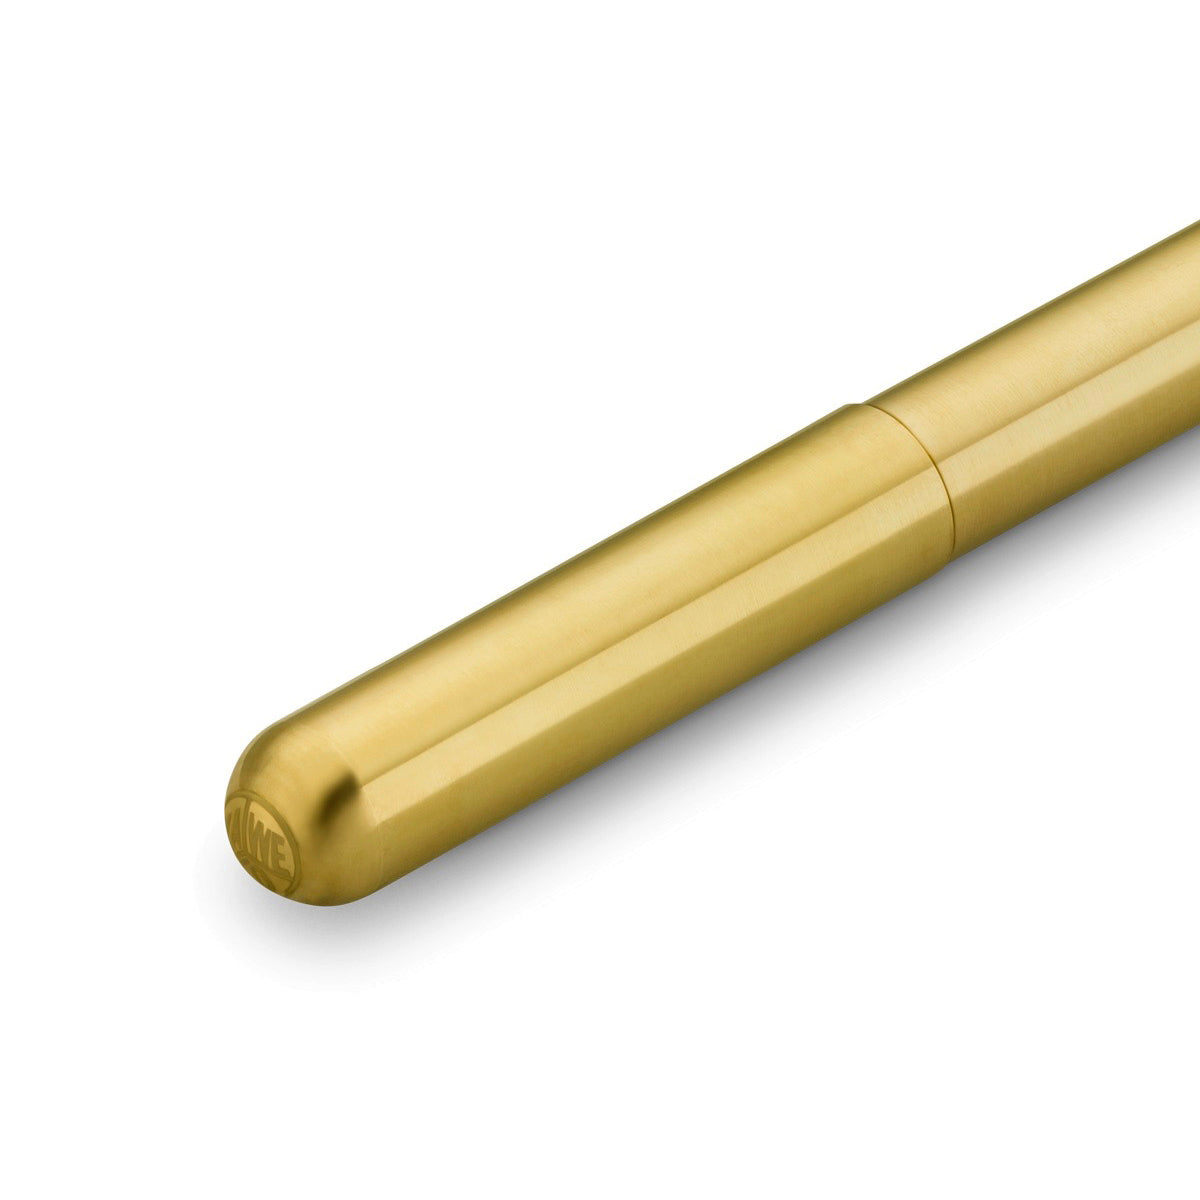 Close-up of the cap of a gold metallic pen with the 'Kaweco' logo on the top.